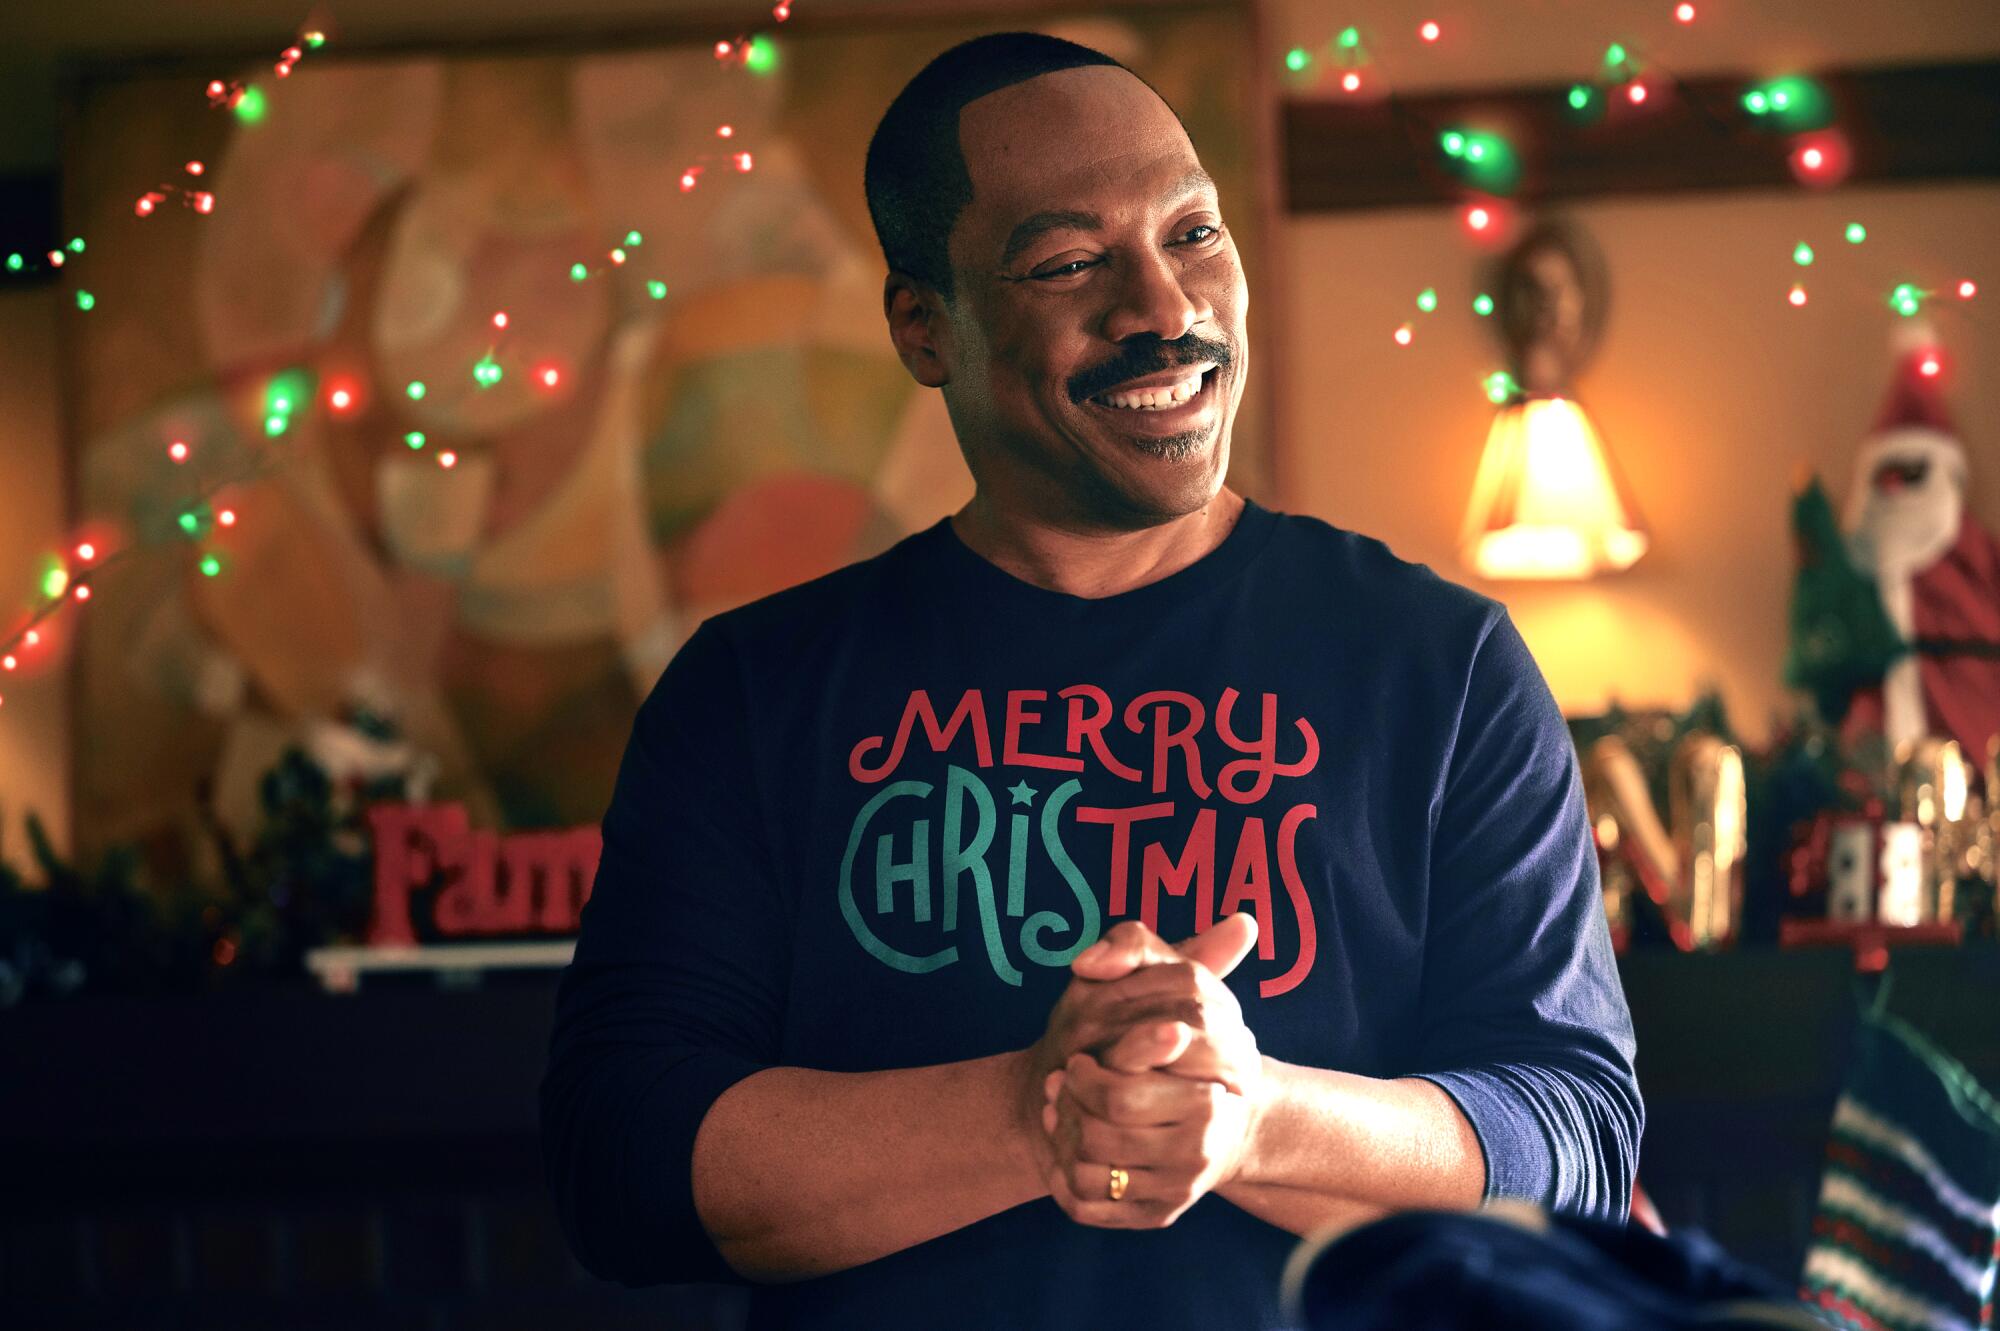 Eddie Murphy as Chris Carver stands with his hands clasped wearing a blue sweater with the words Merry Christmas.